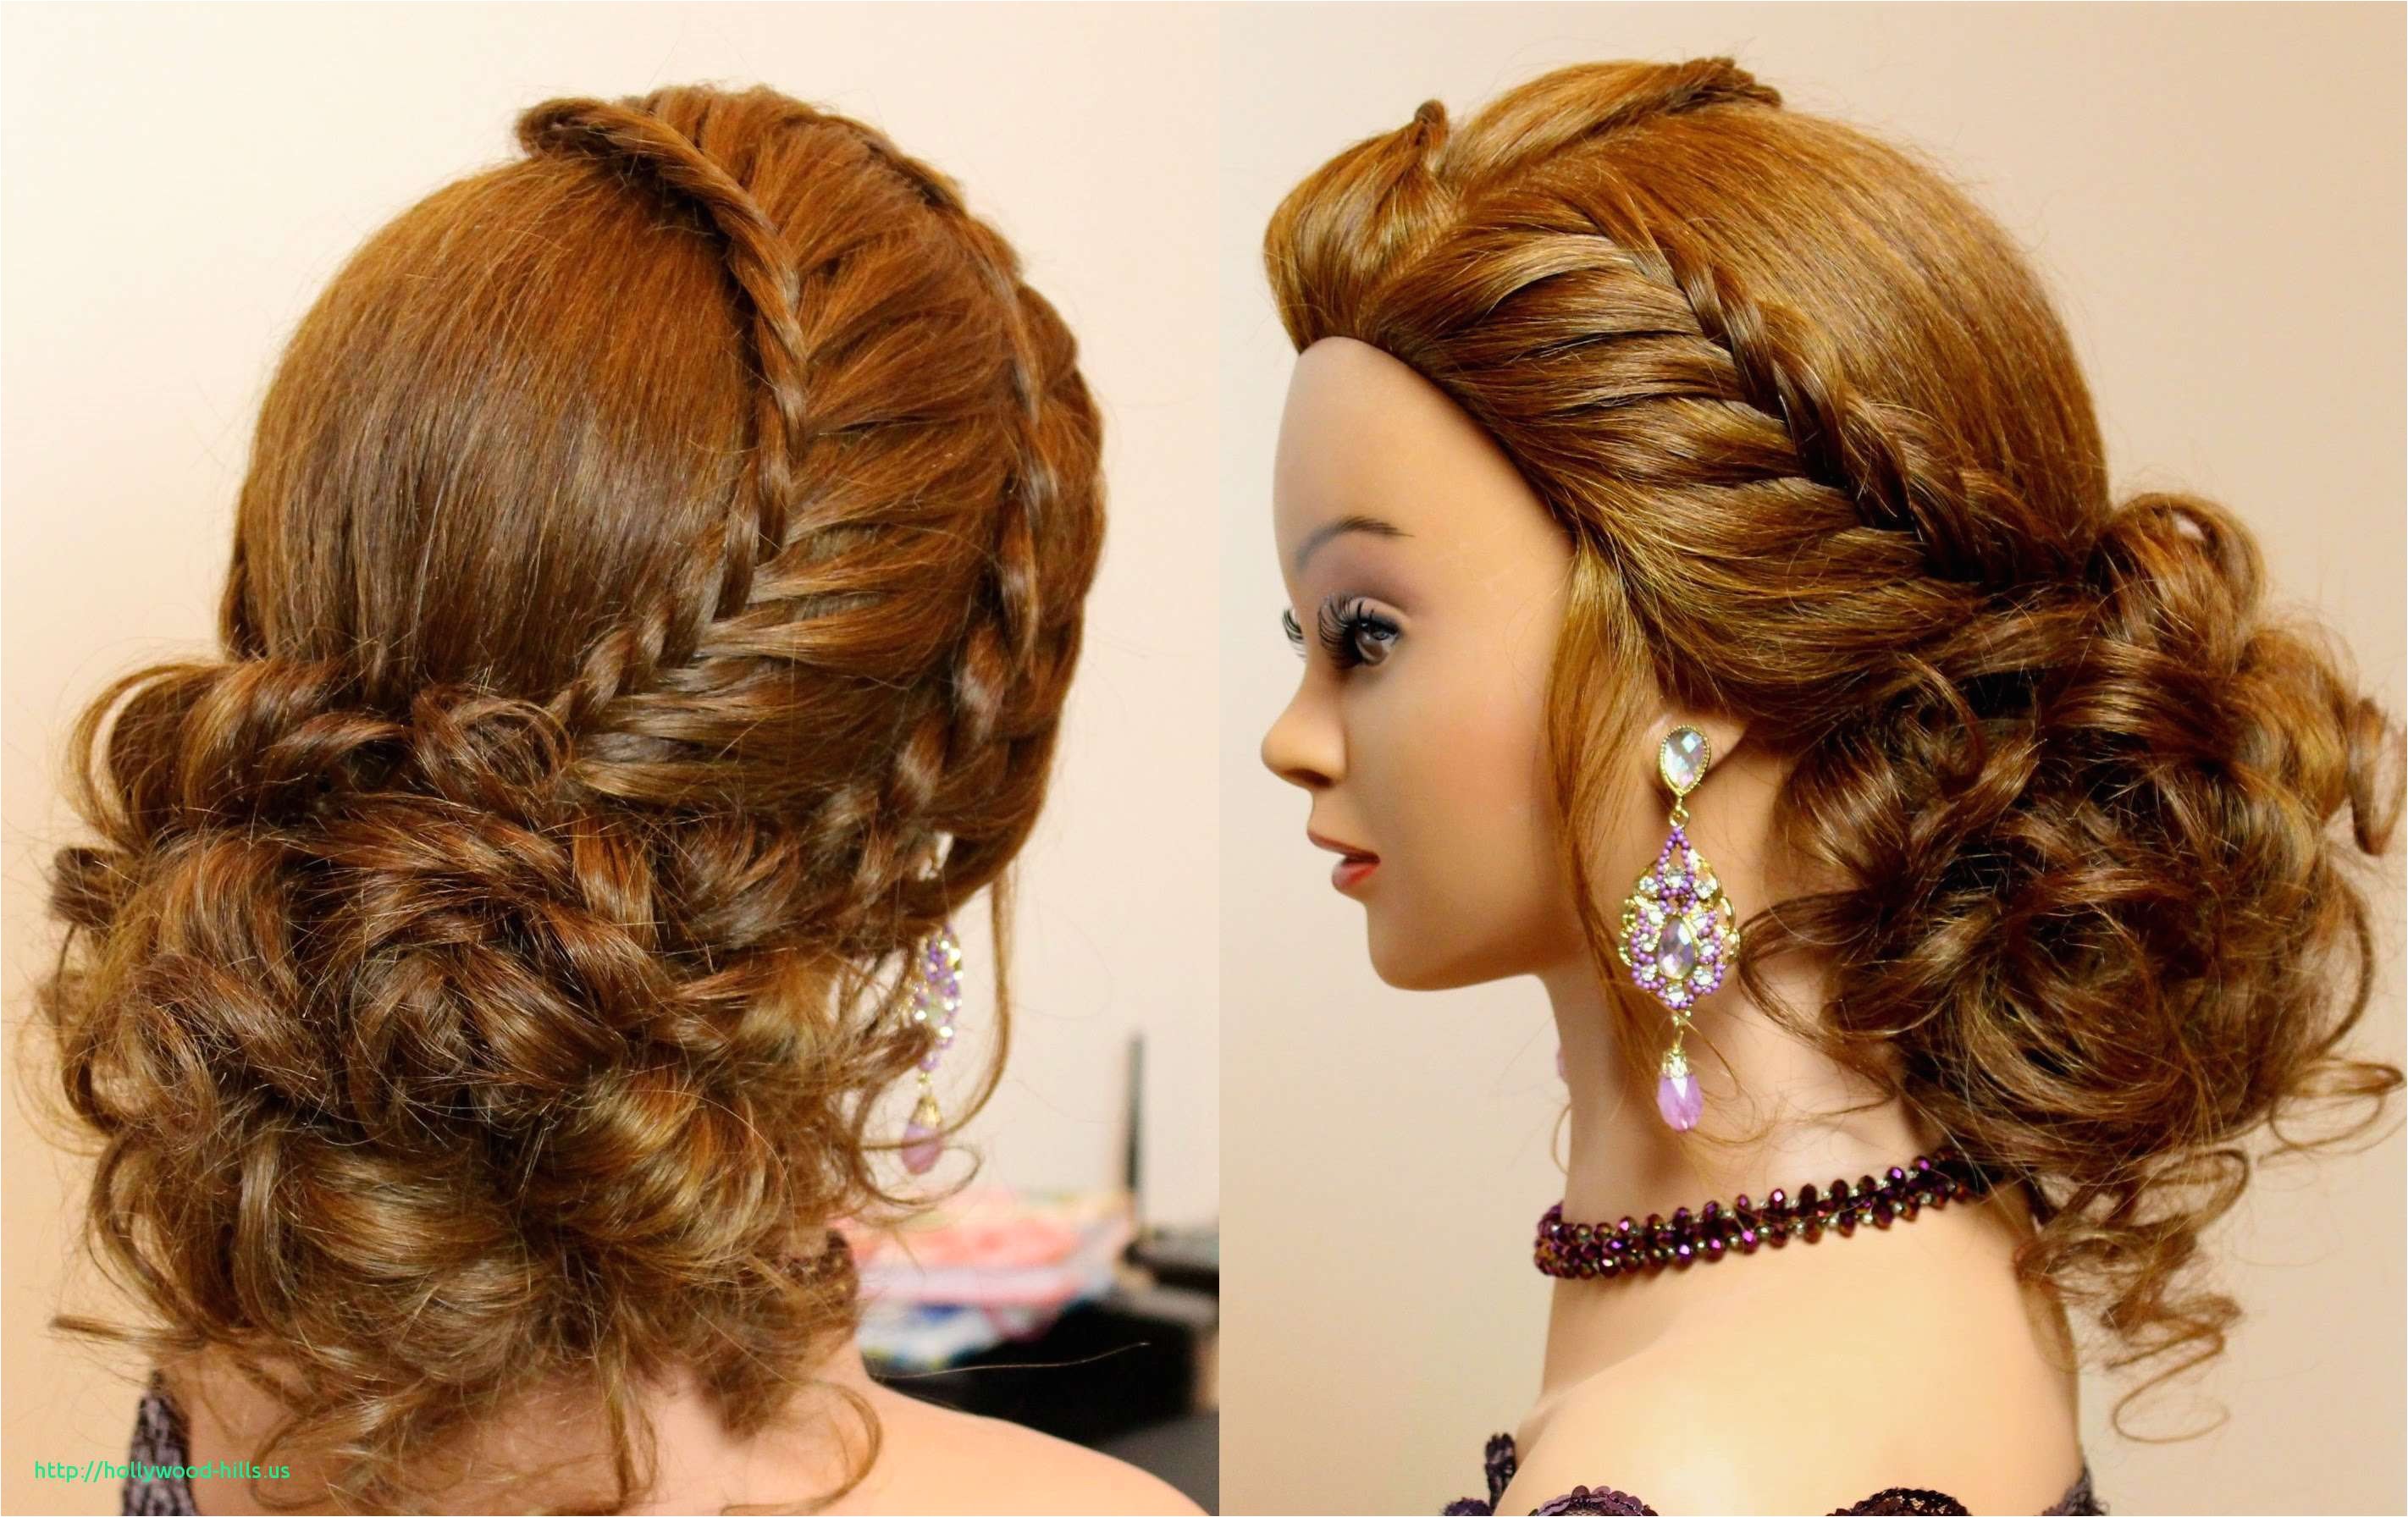 Hairstyles for Medium Wavy Hair Elegant 80s Prom Hairstyles New these 80s Hair Trends are Back